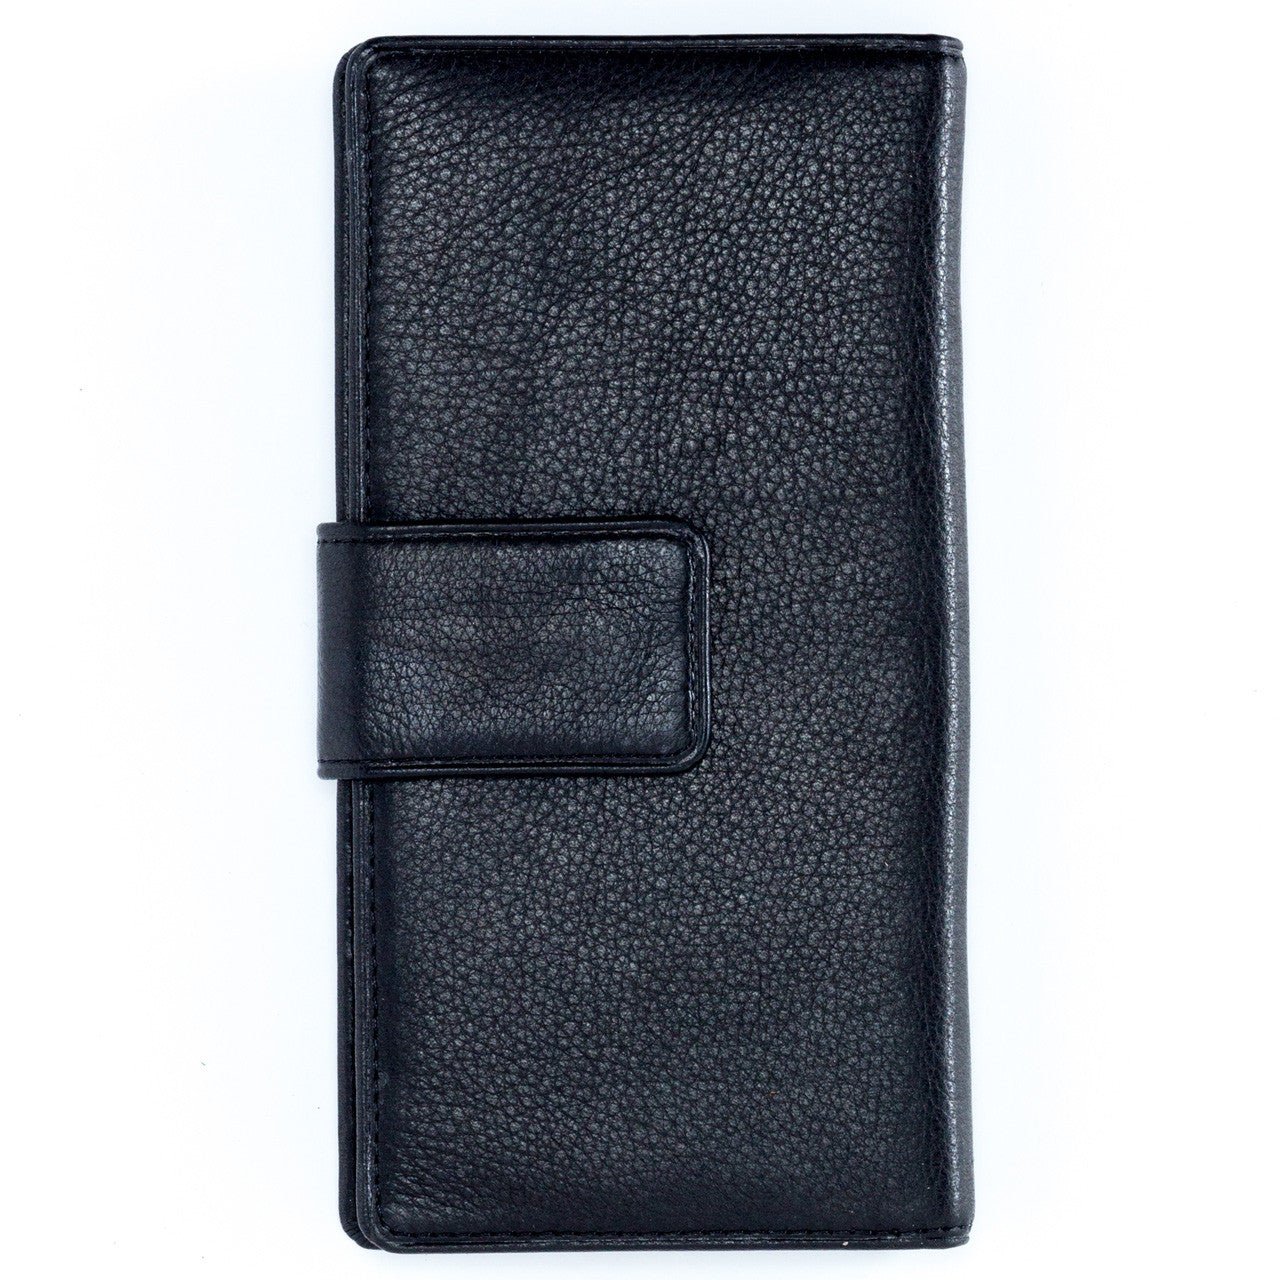 SVEN Style No. W58 Wallet black leather